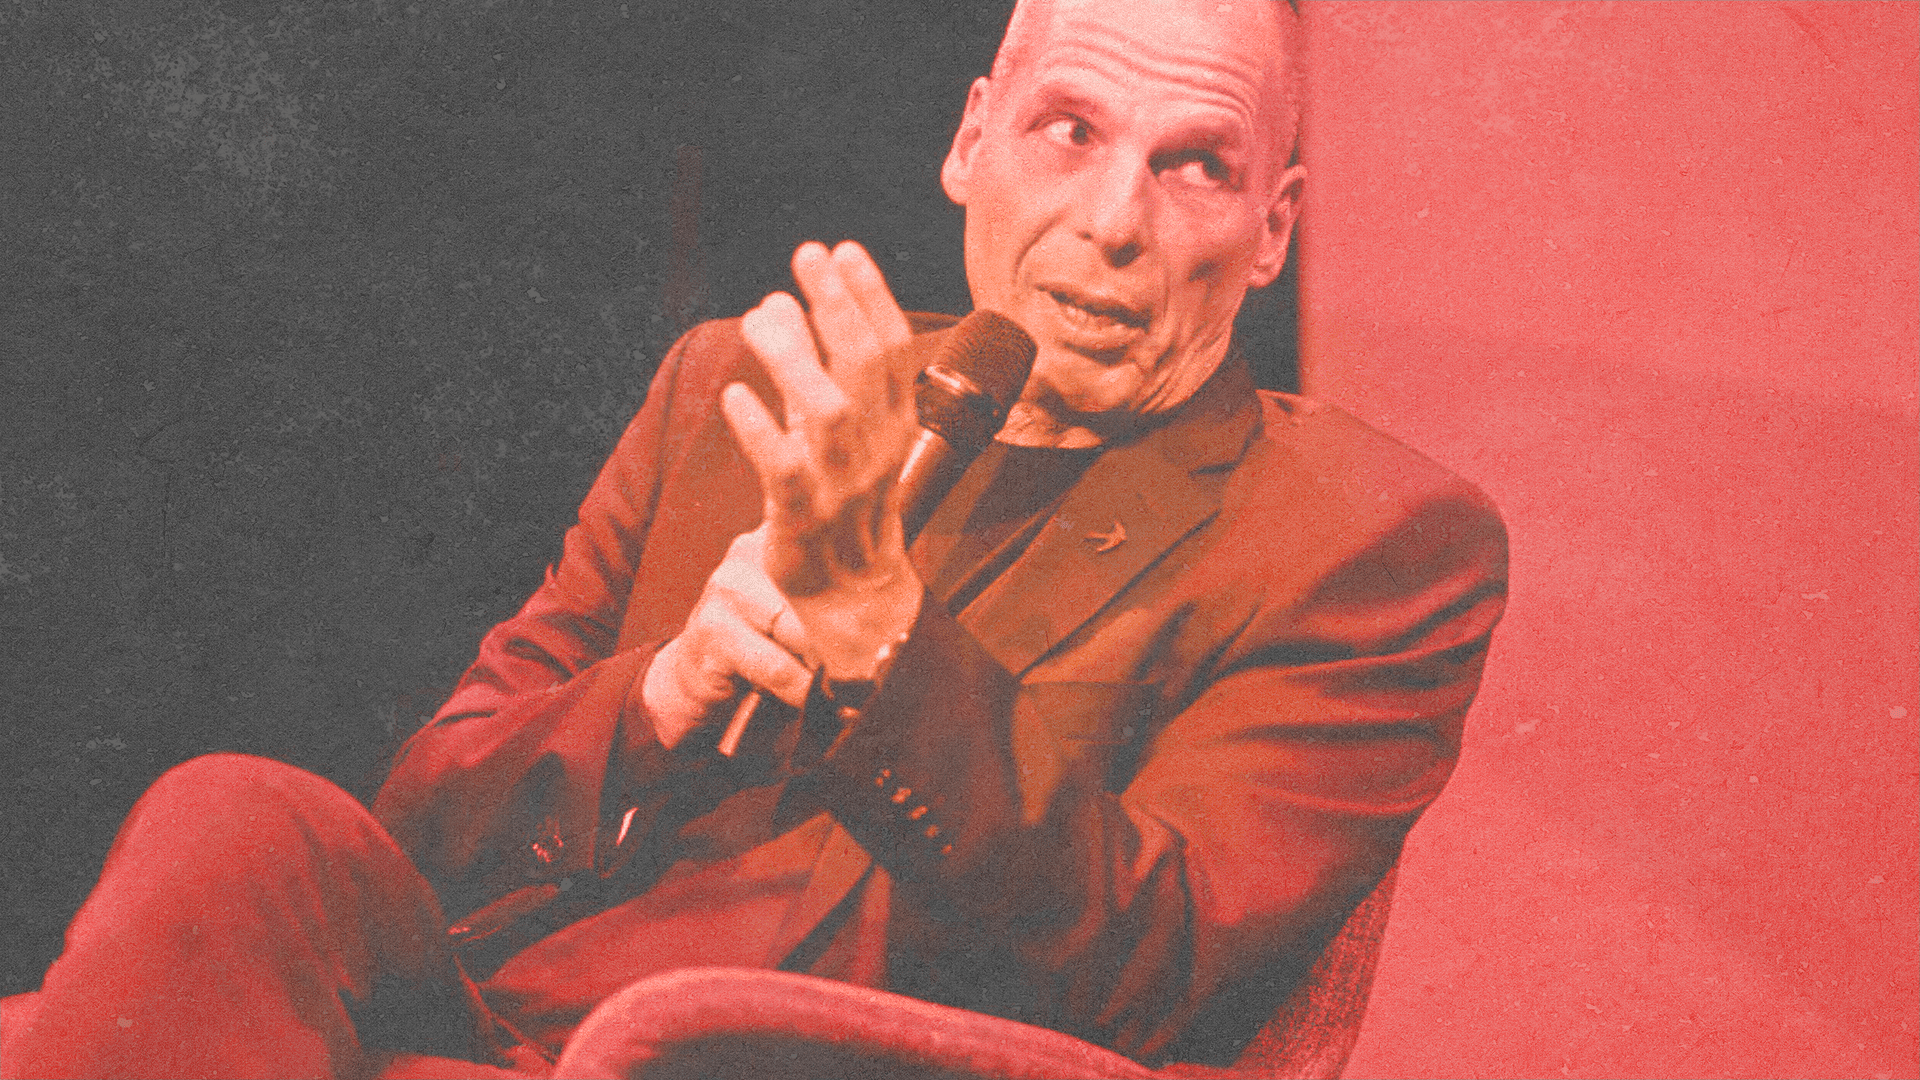 Varoufakis interview with La Stampa: Angela Merkel, Italy’s PD and Greece’s refugee policy